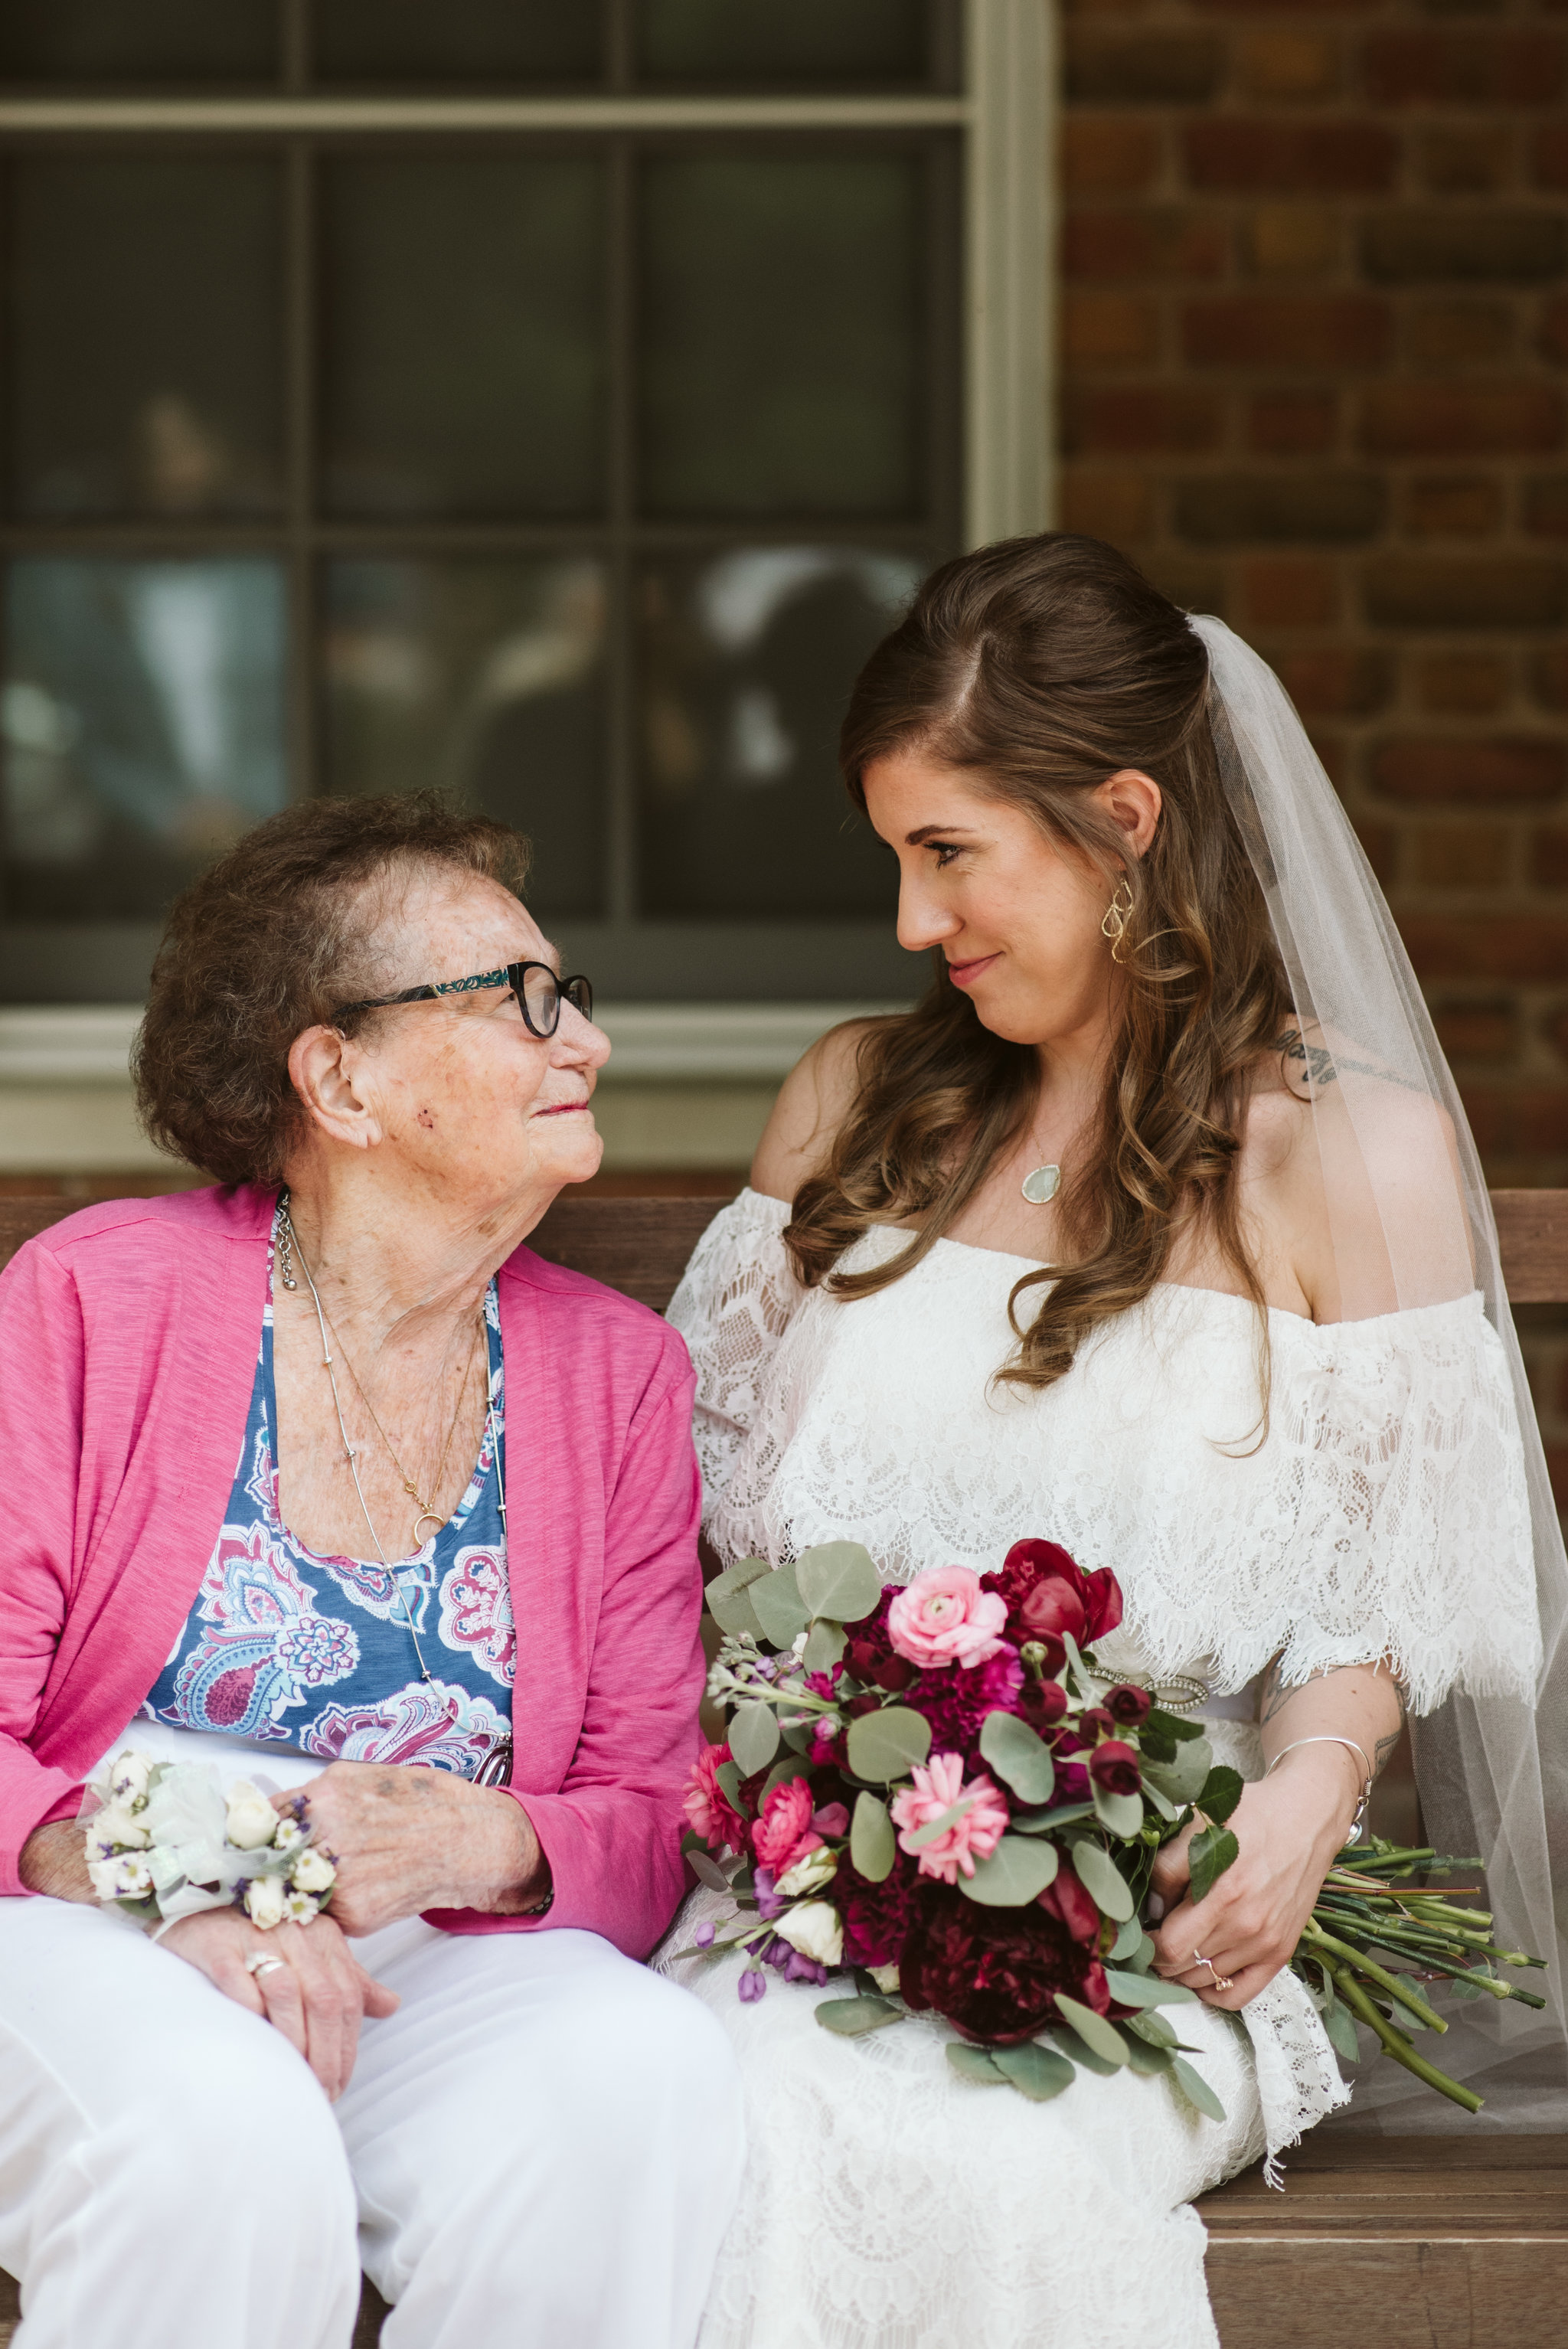  Annapolis, Quaker Wedding, Maryland Wedding Photographer, Intimate, Small Wedding, Vintage, DIY, Bride and Grandmother Smiling at Each Other, Sweet Family Portrait 